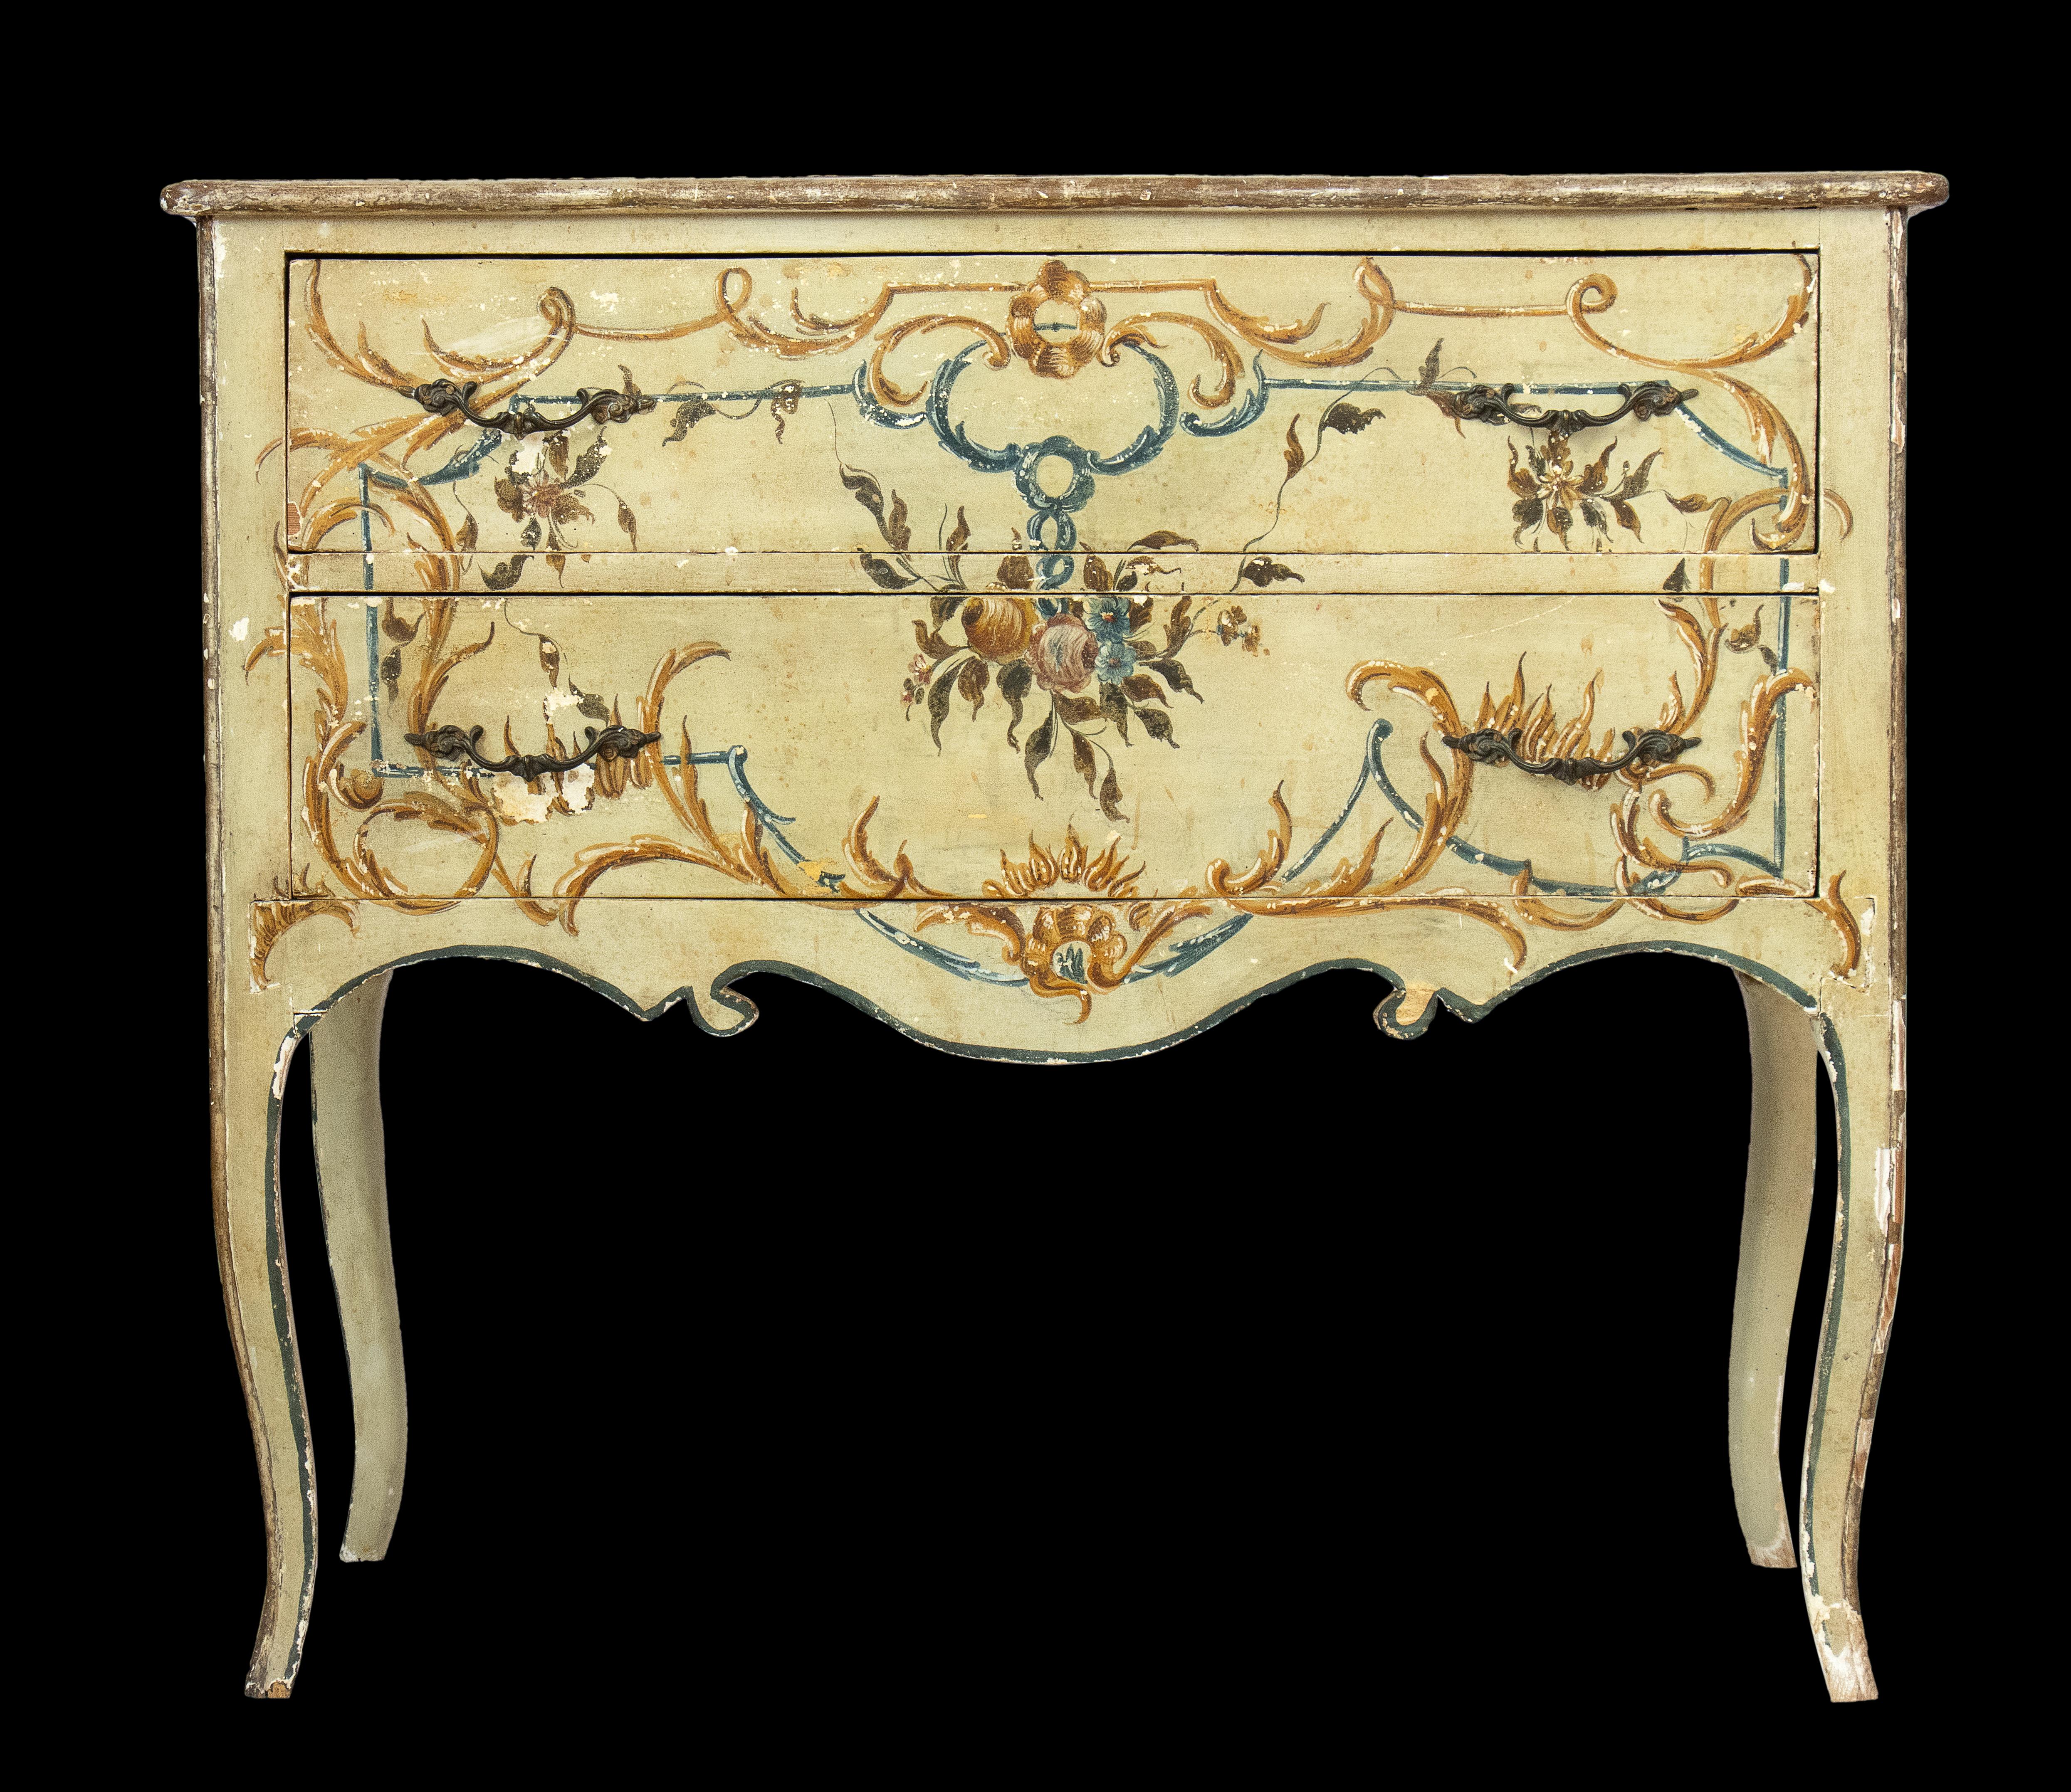 Fantastic Louis XVI painted and lacquered chest of drawers - Lombard-Venetian , 18th century ( 1770-1780 circa)
Fir wood frame, faux marble painted top, two drawers on painted front and saber legs.
Height x width x depth: 95 x 111 x 55 cm.
Item